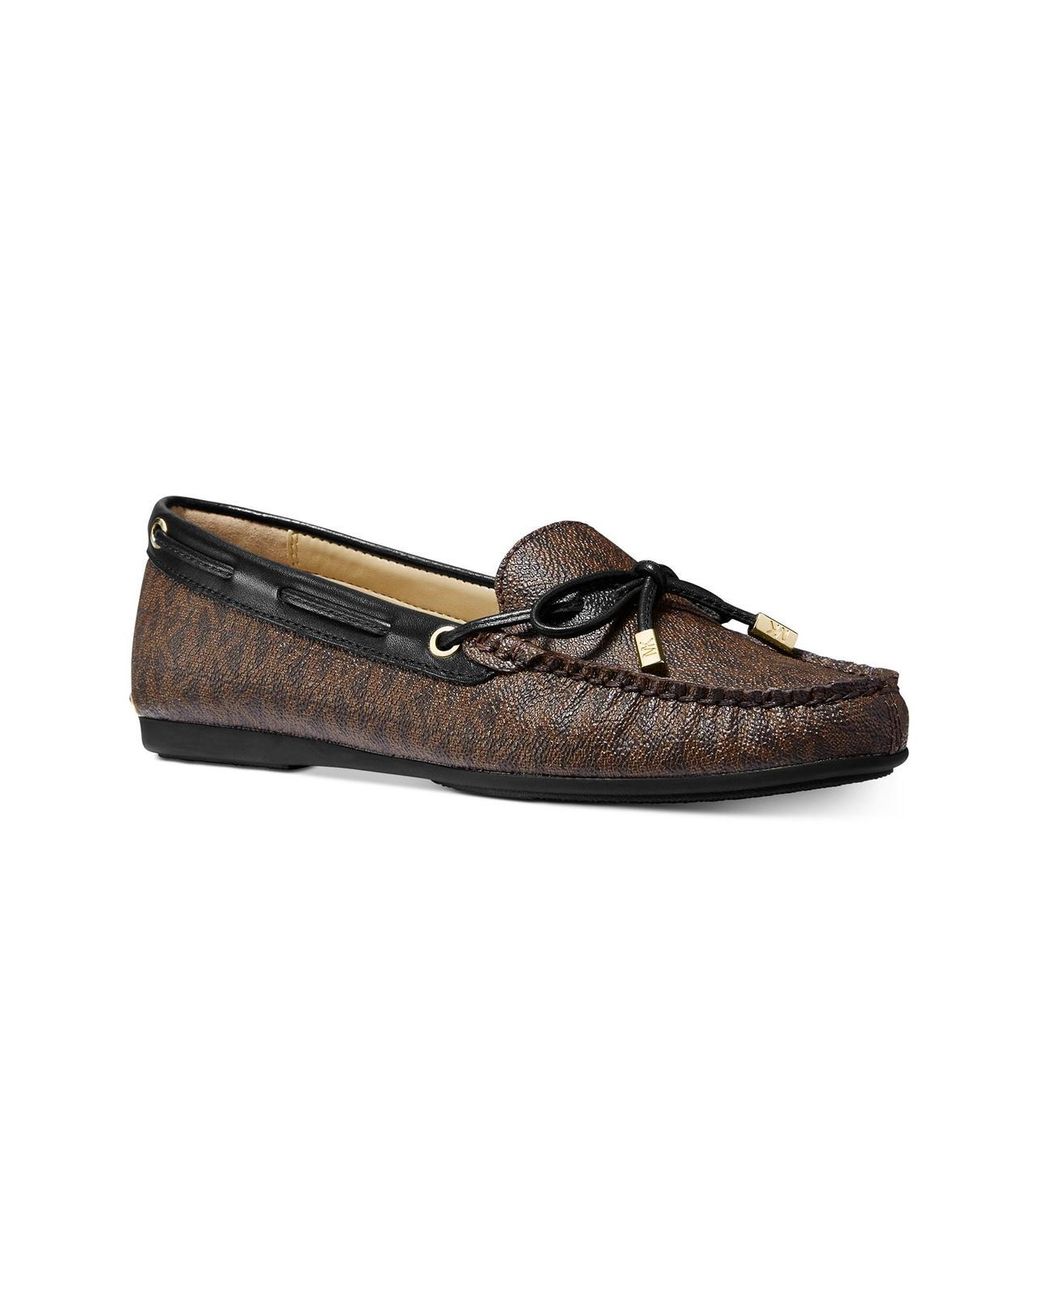 MICHAEL Michael Kors Sutton Moc Slip On Loafer Moccasins in Brown | Lyst